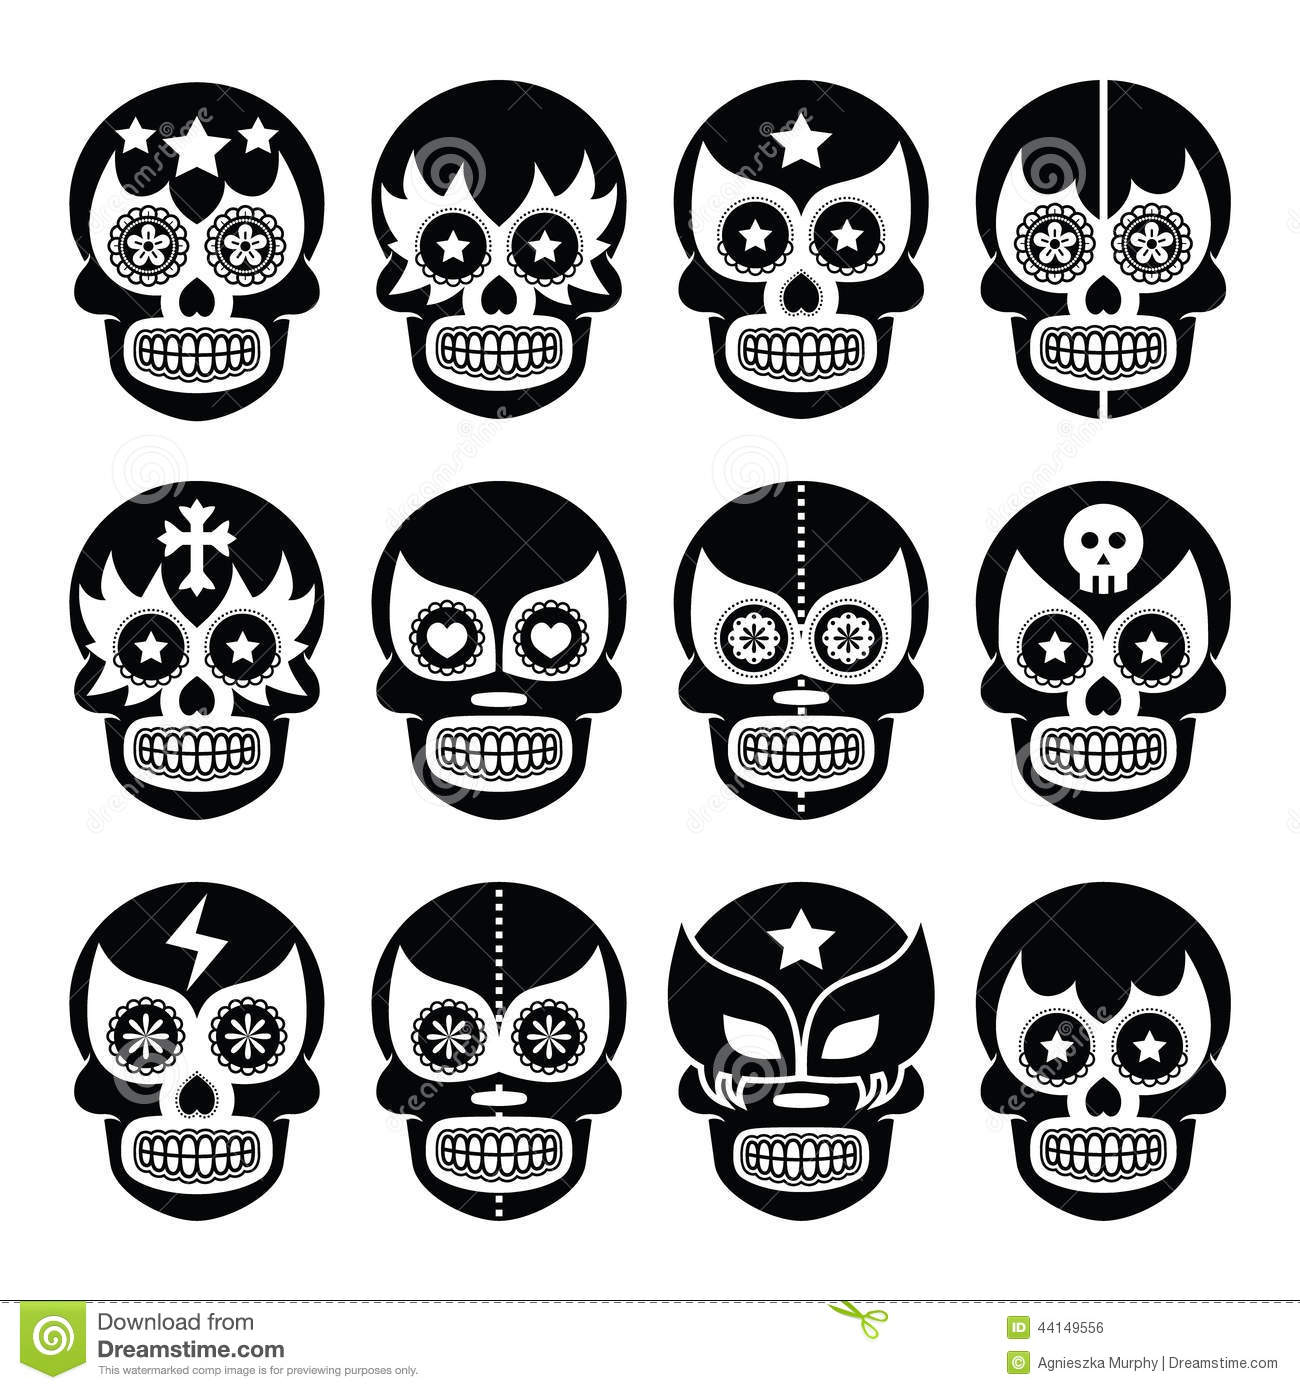     Icons Set Of Mexican Wrestling Masks On Skulls Isolated On White